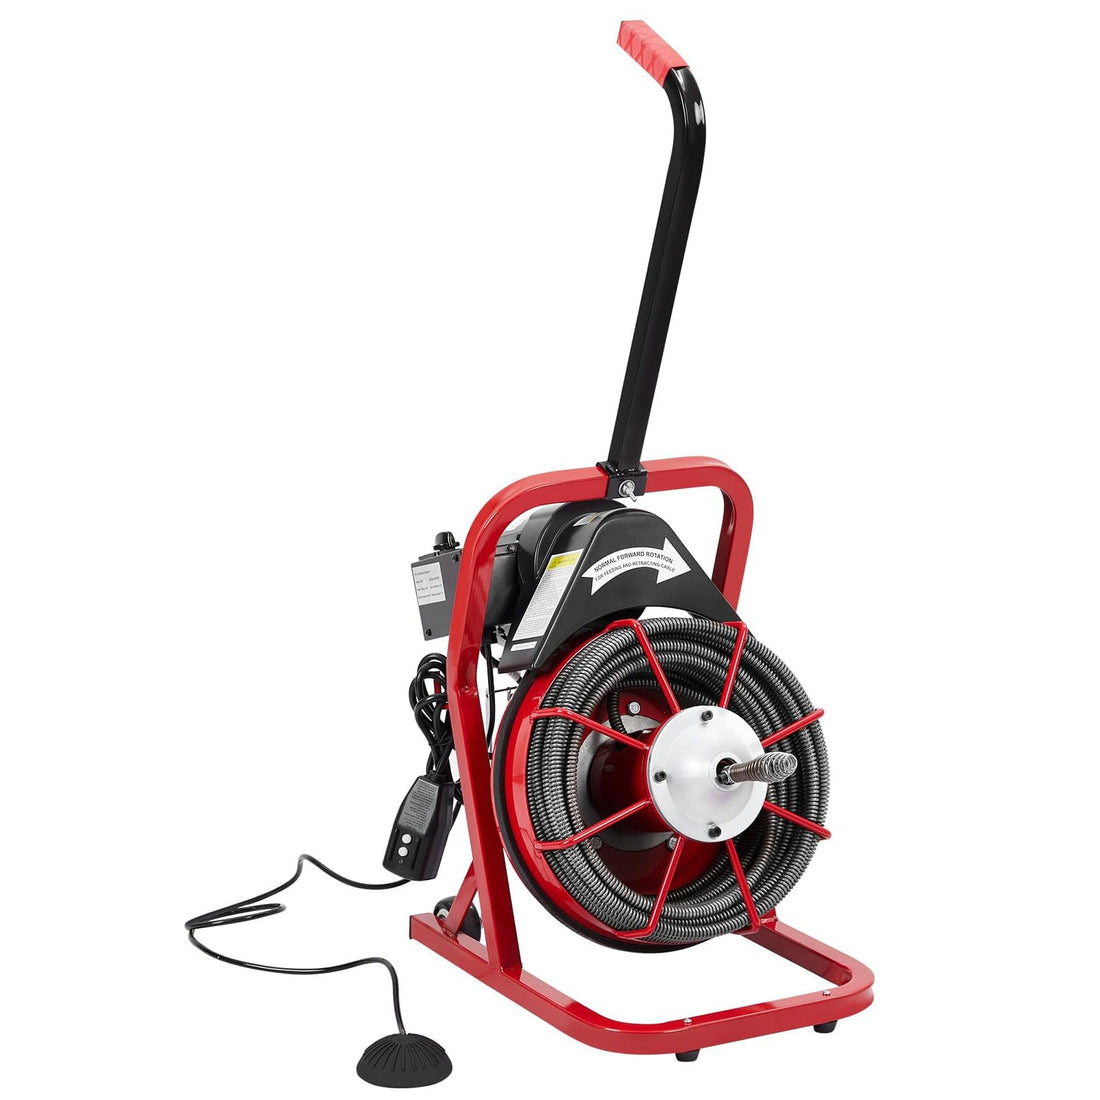 50Ft 3/8 Inch Electric Drain Cleaner Machine for 1-4 Inch Pipes